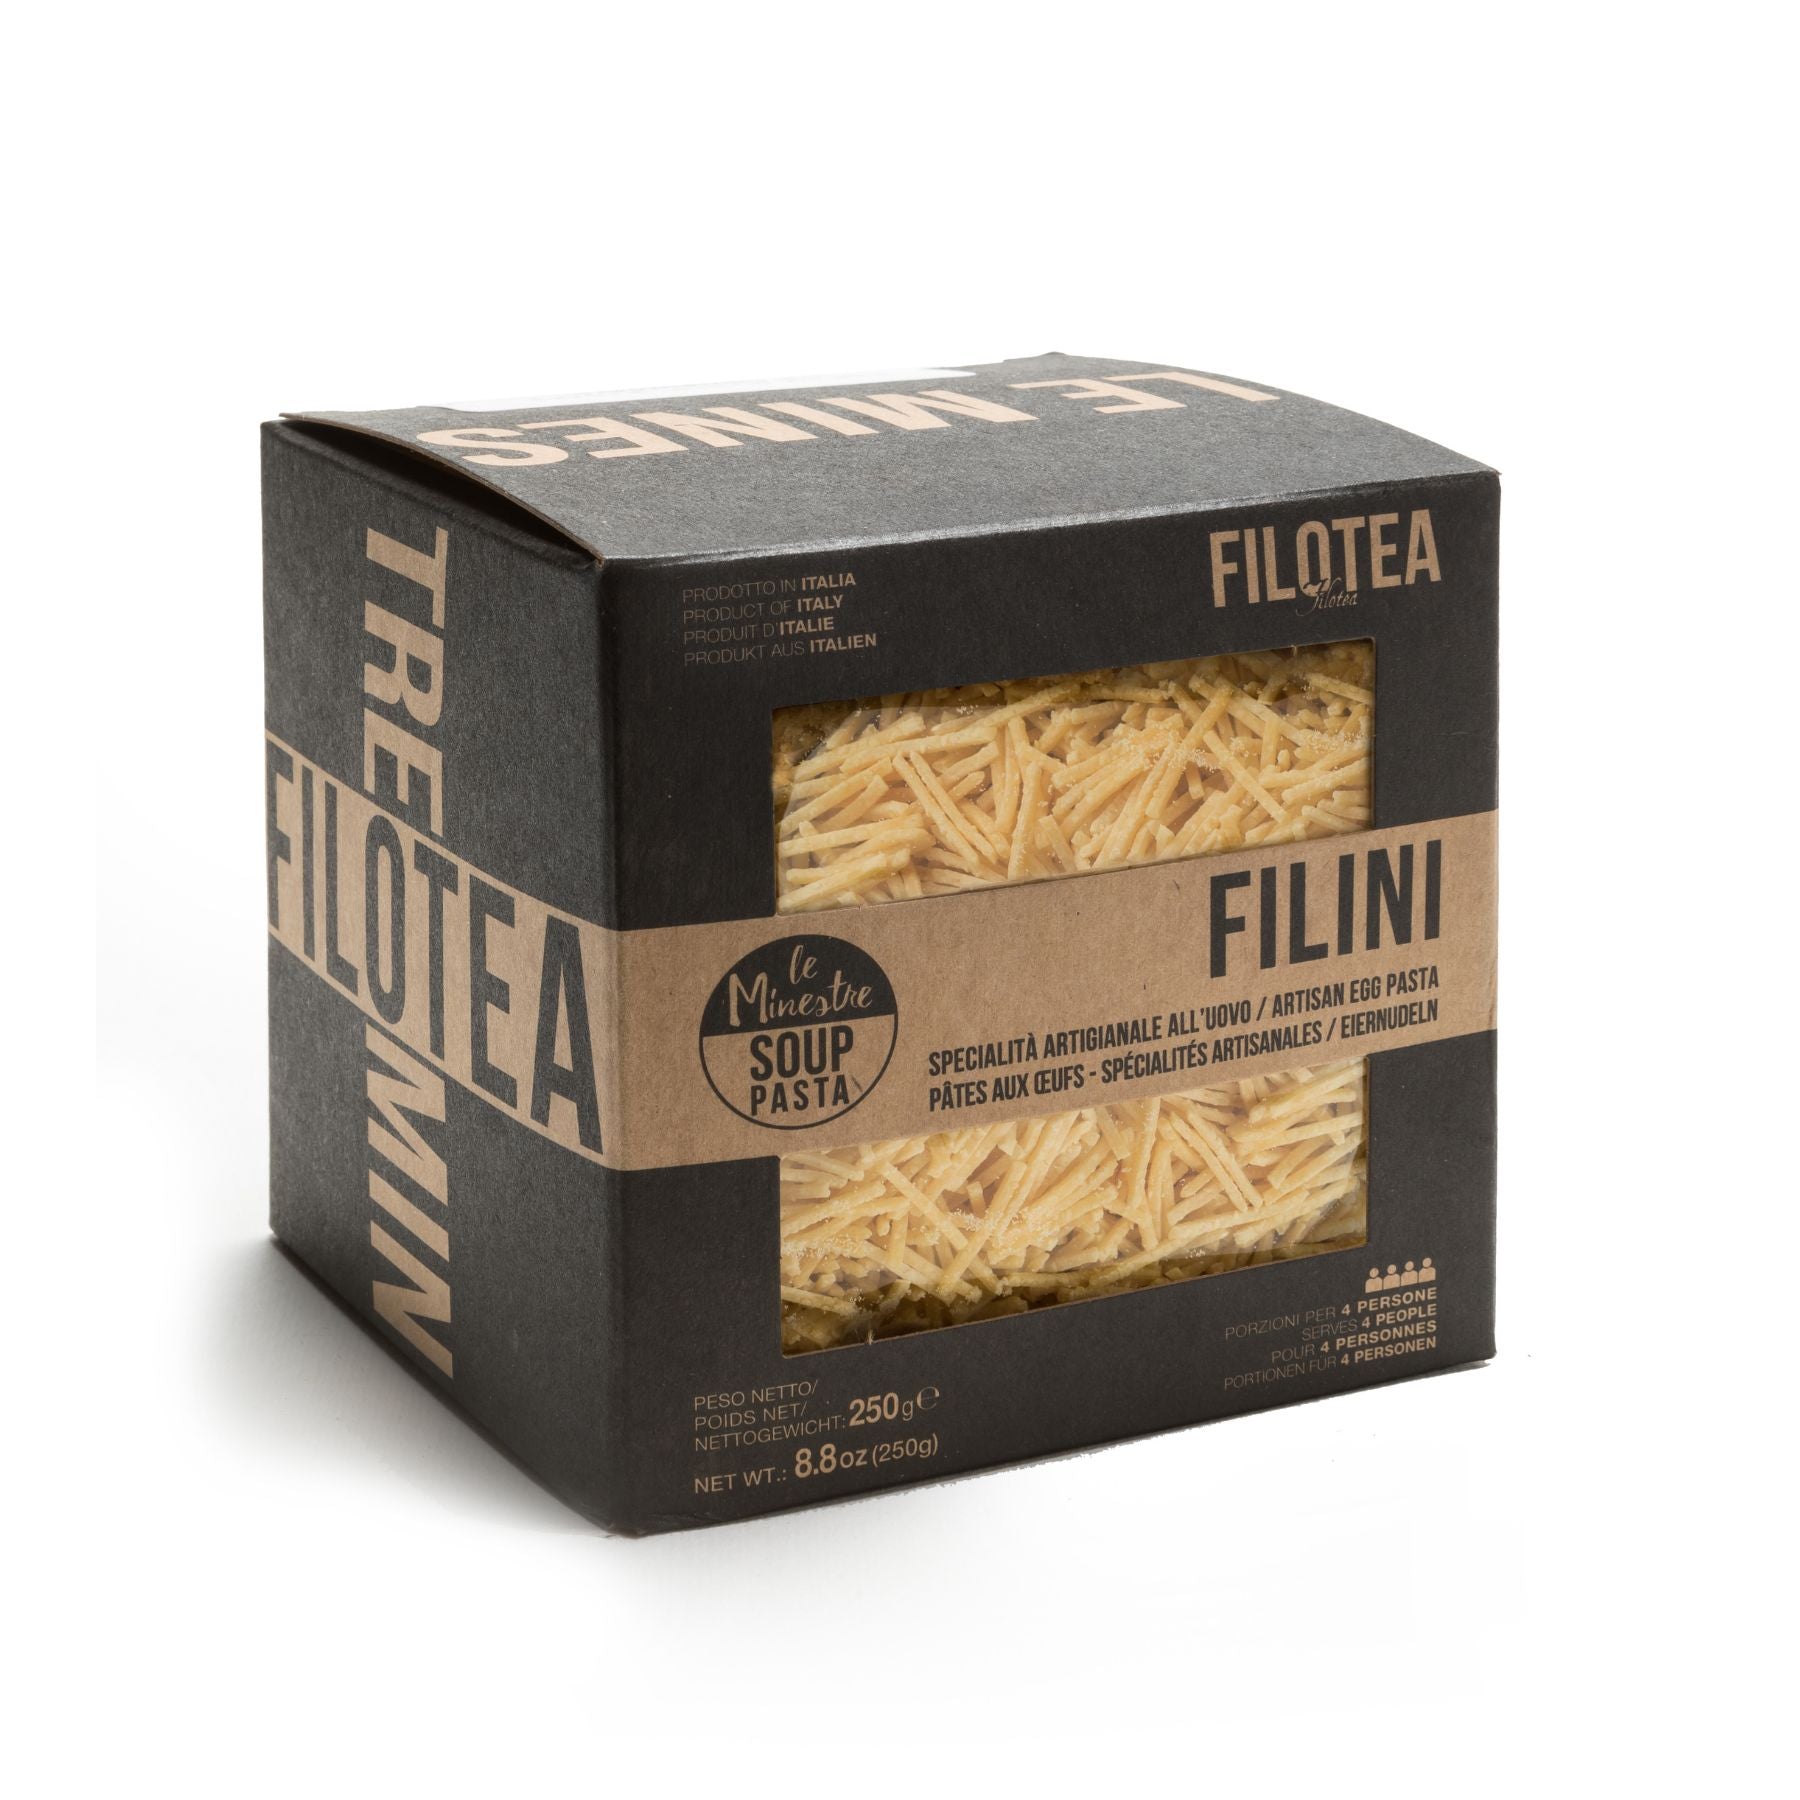 Filotea Filini Tiny Egg Pasta 250g | Imported and distributed in the UK by Just Gourmet Foods